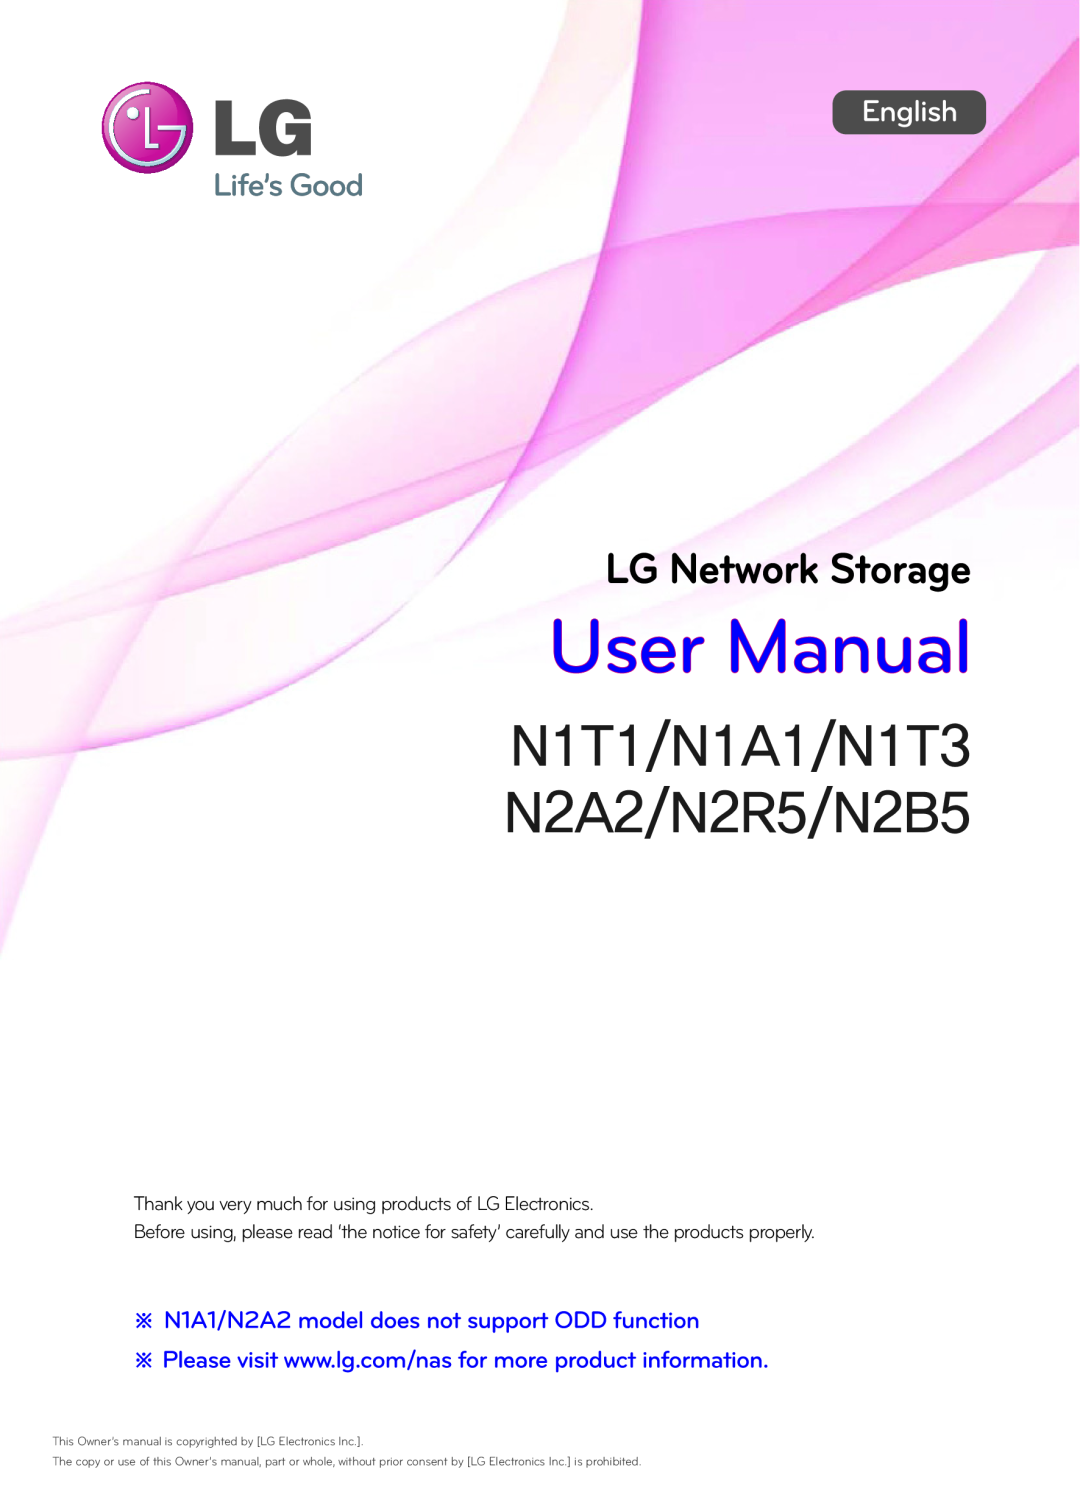 LG Electronics N1A1, N2R5, N2A2, N1T1, N1T3, N2B5 owner manual Thank you very much for using products of LG Electronics 